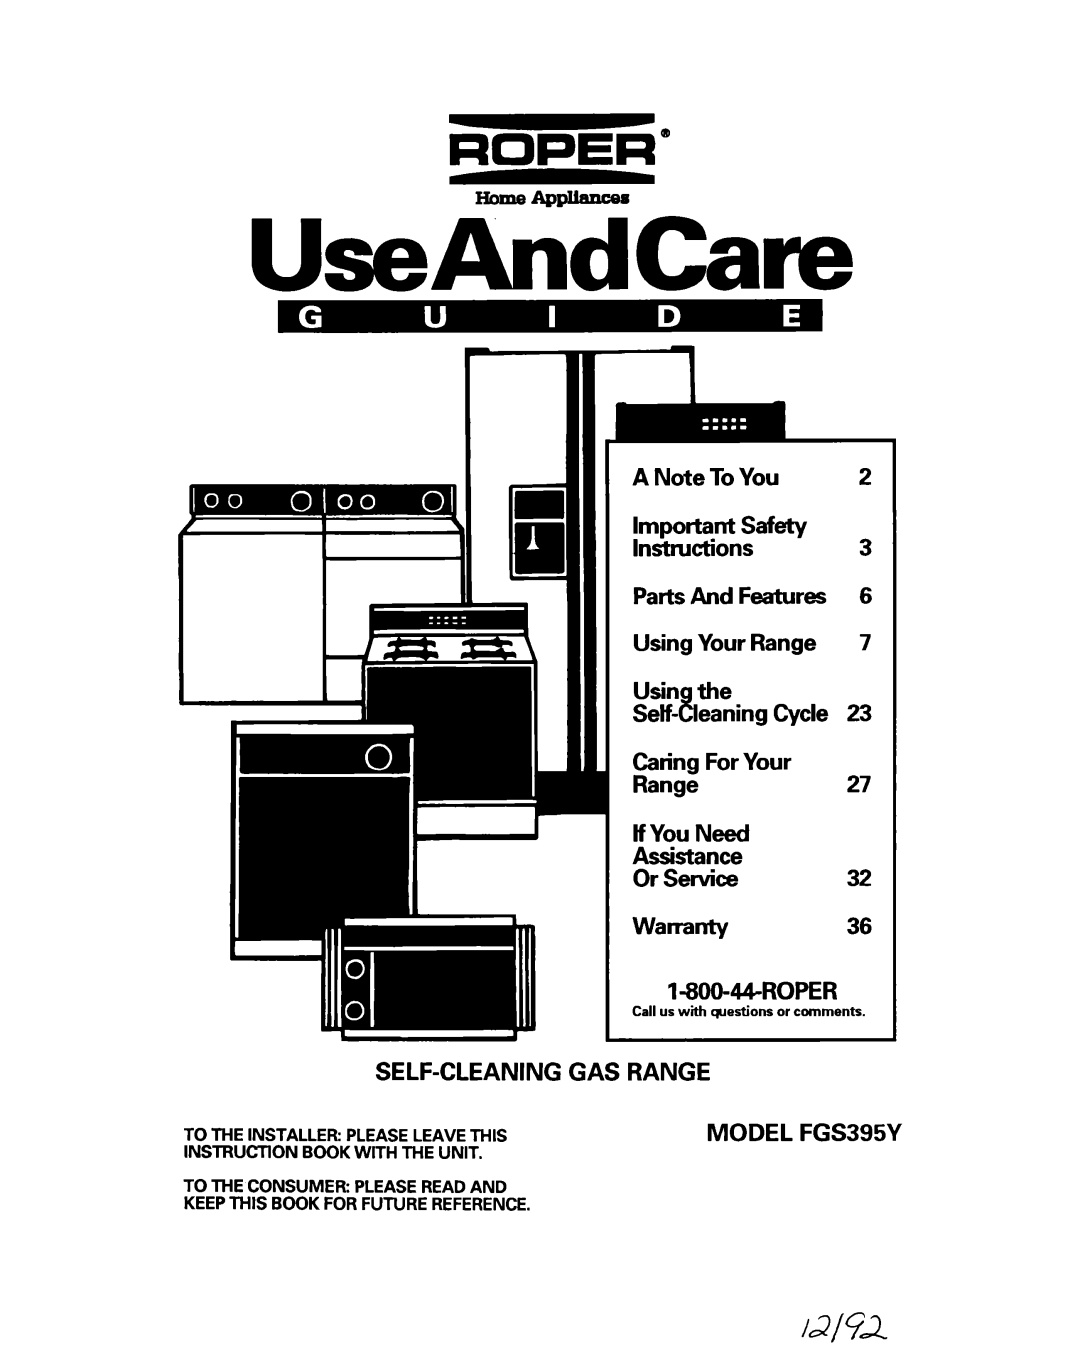 Whirlpool FGS395Y important safety instructions UseAndCare 